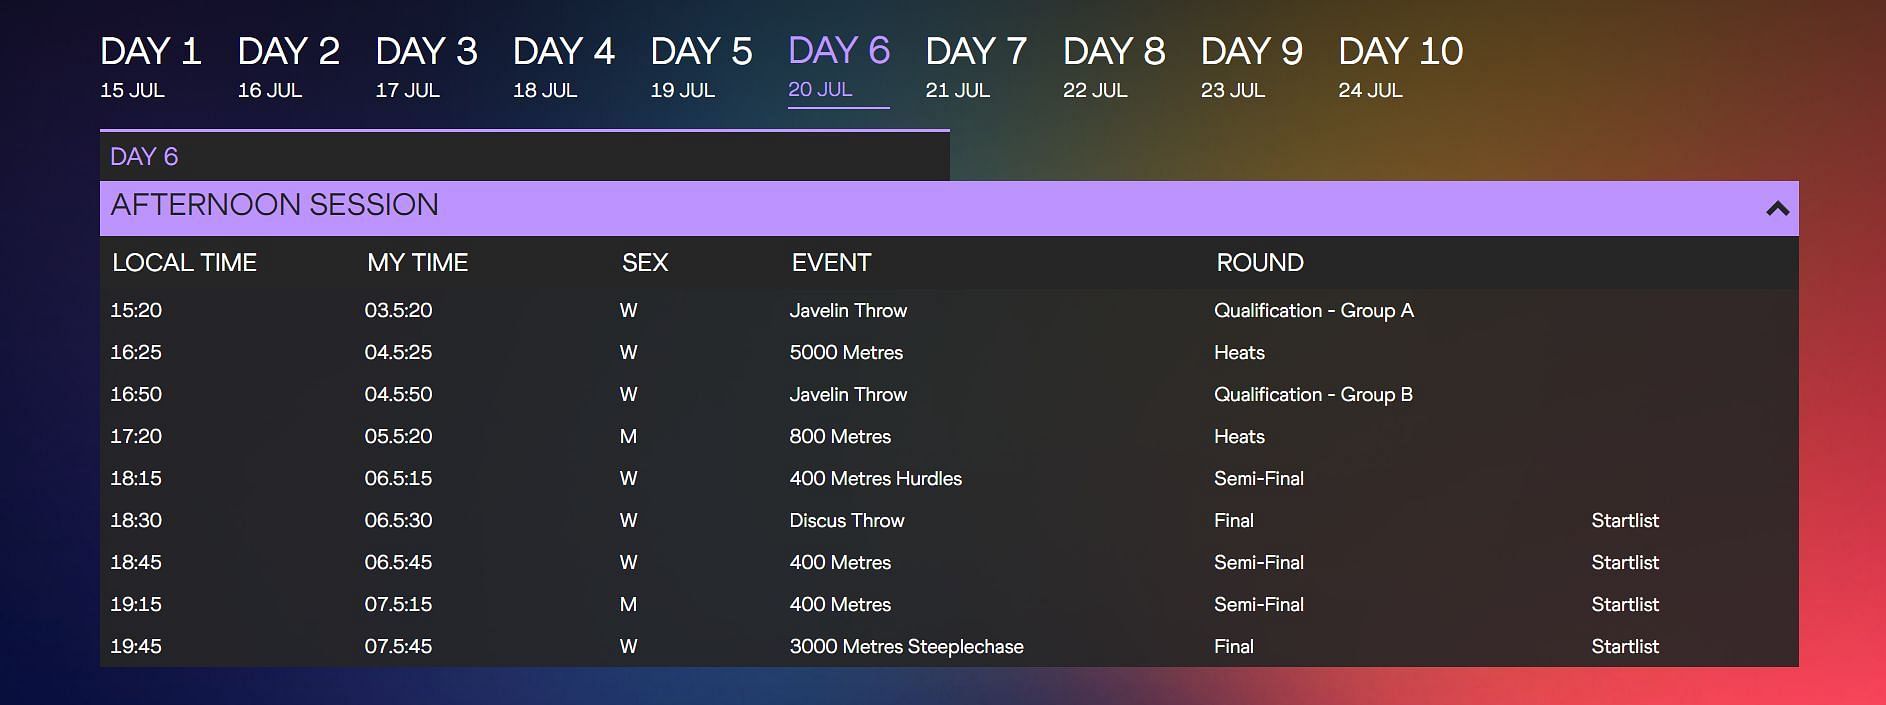 The complete schedule for Day 6 of the World Athletics Championship 2022 (Image via World Athletes)